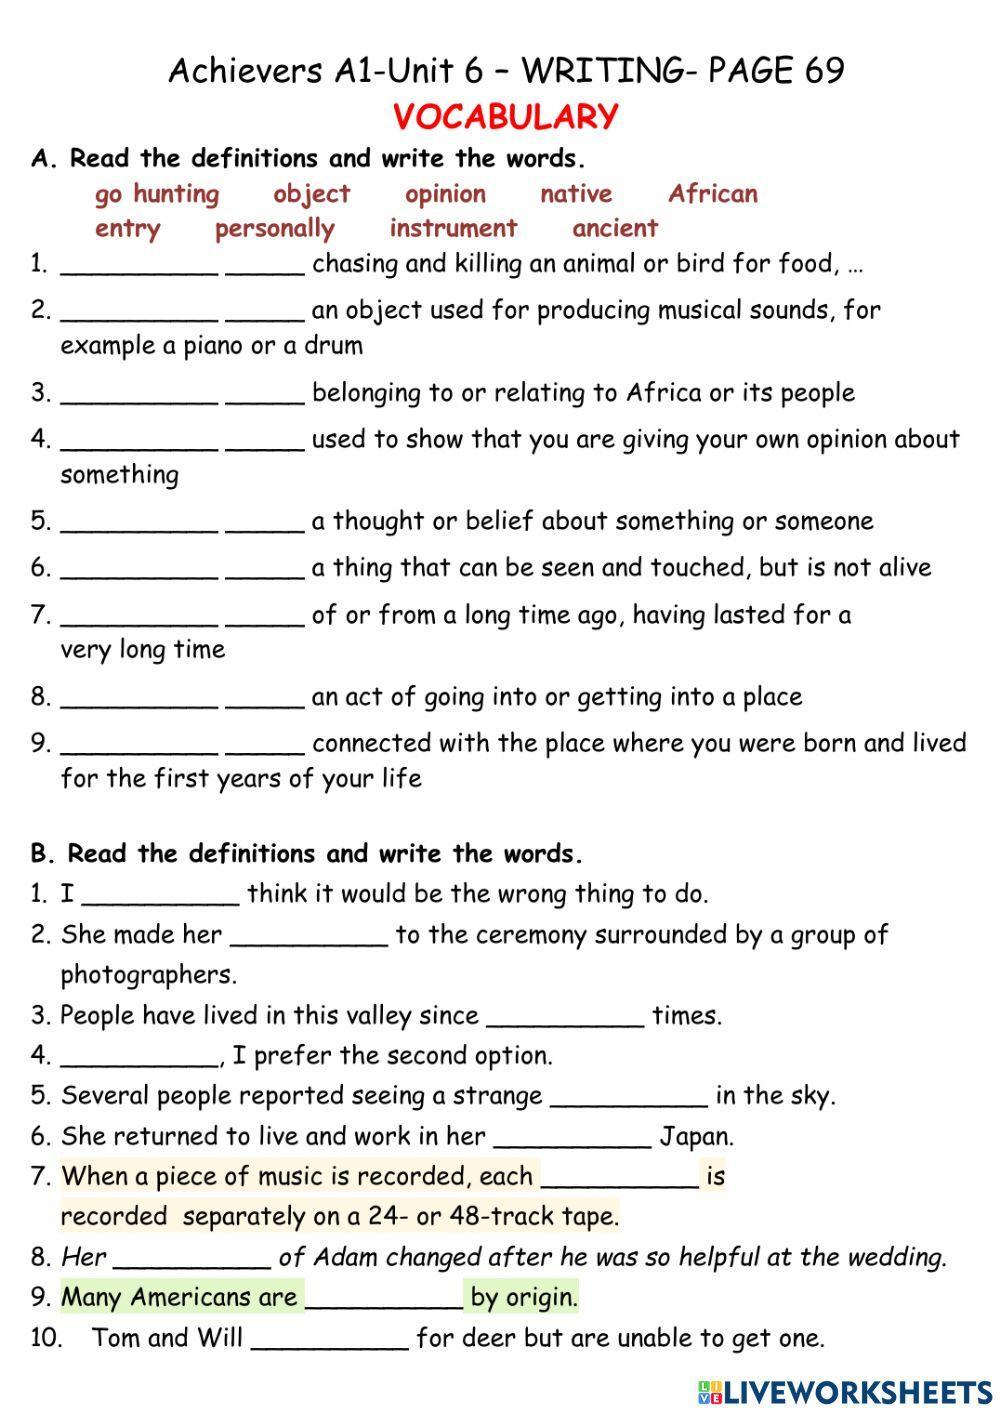 Achievers a1-unit6-writing-page 69